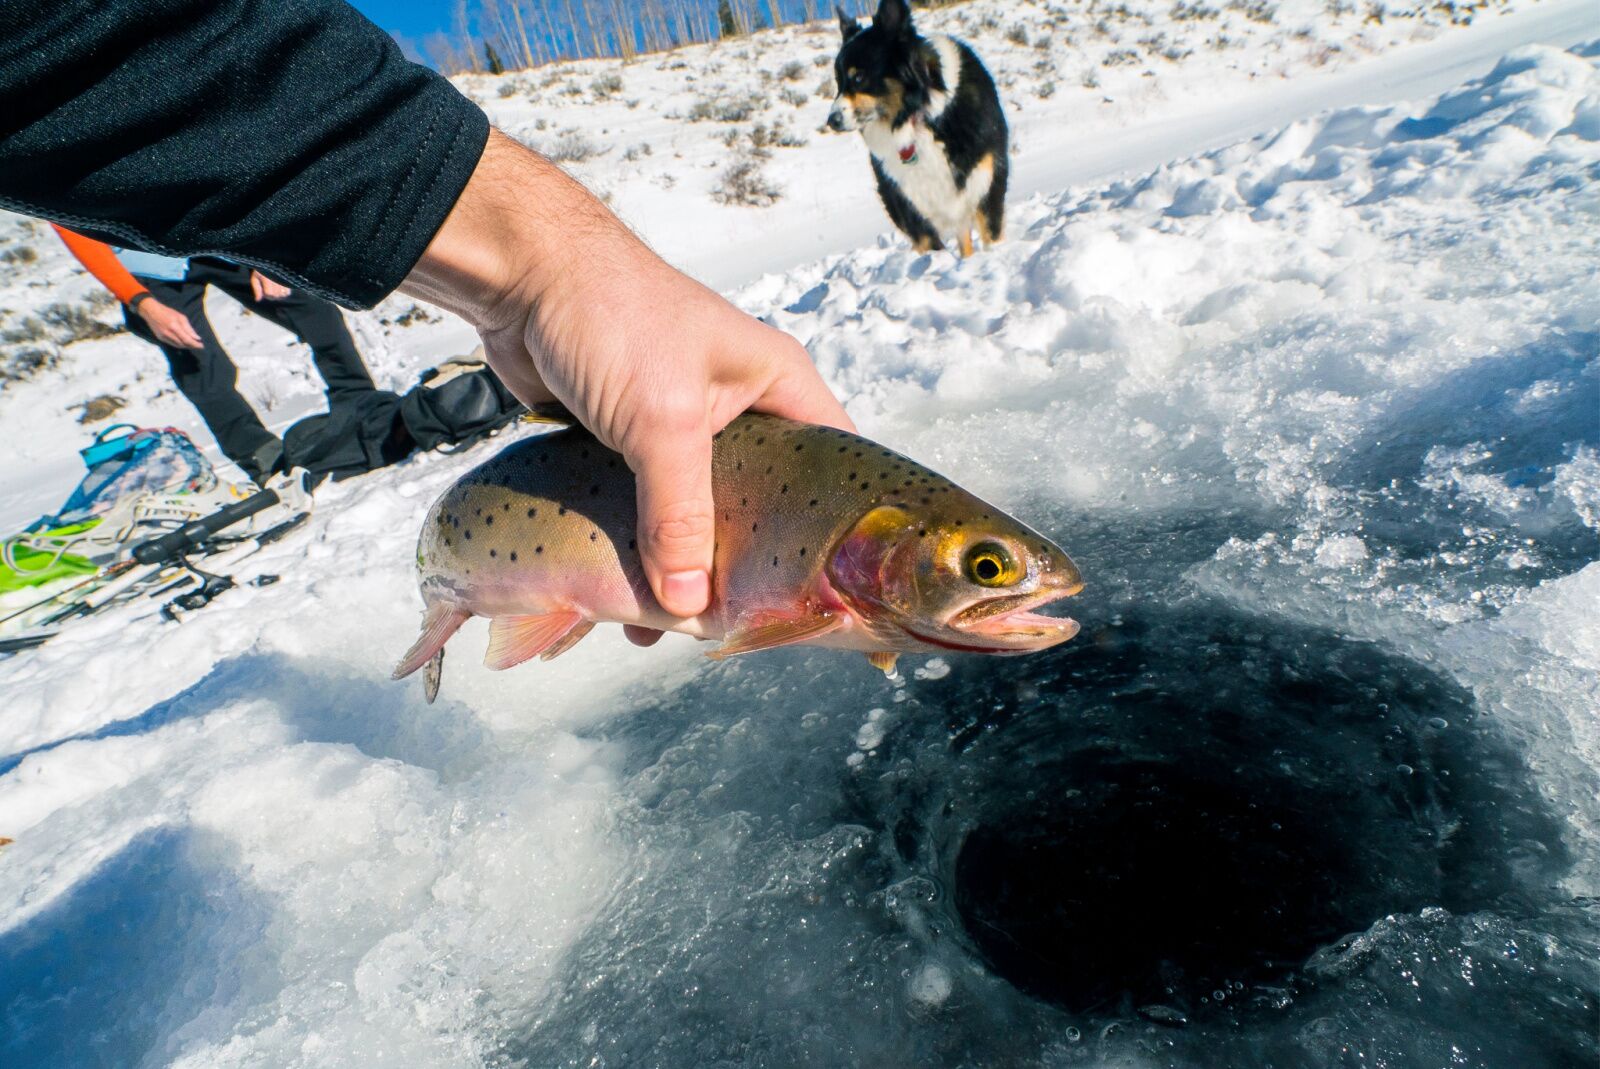 ice fishing at a lake in wyoming, close up of hand 